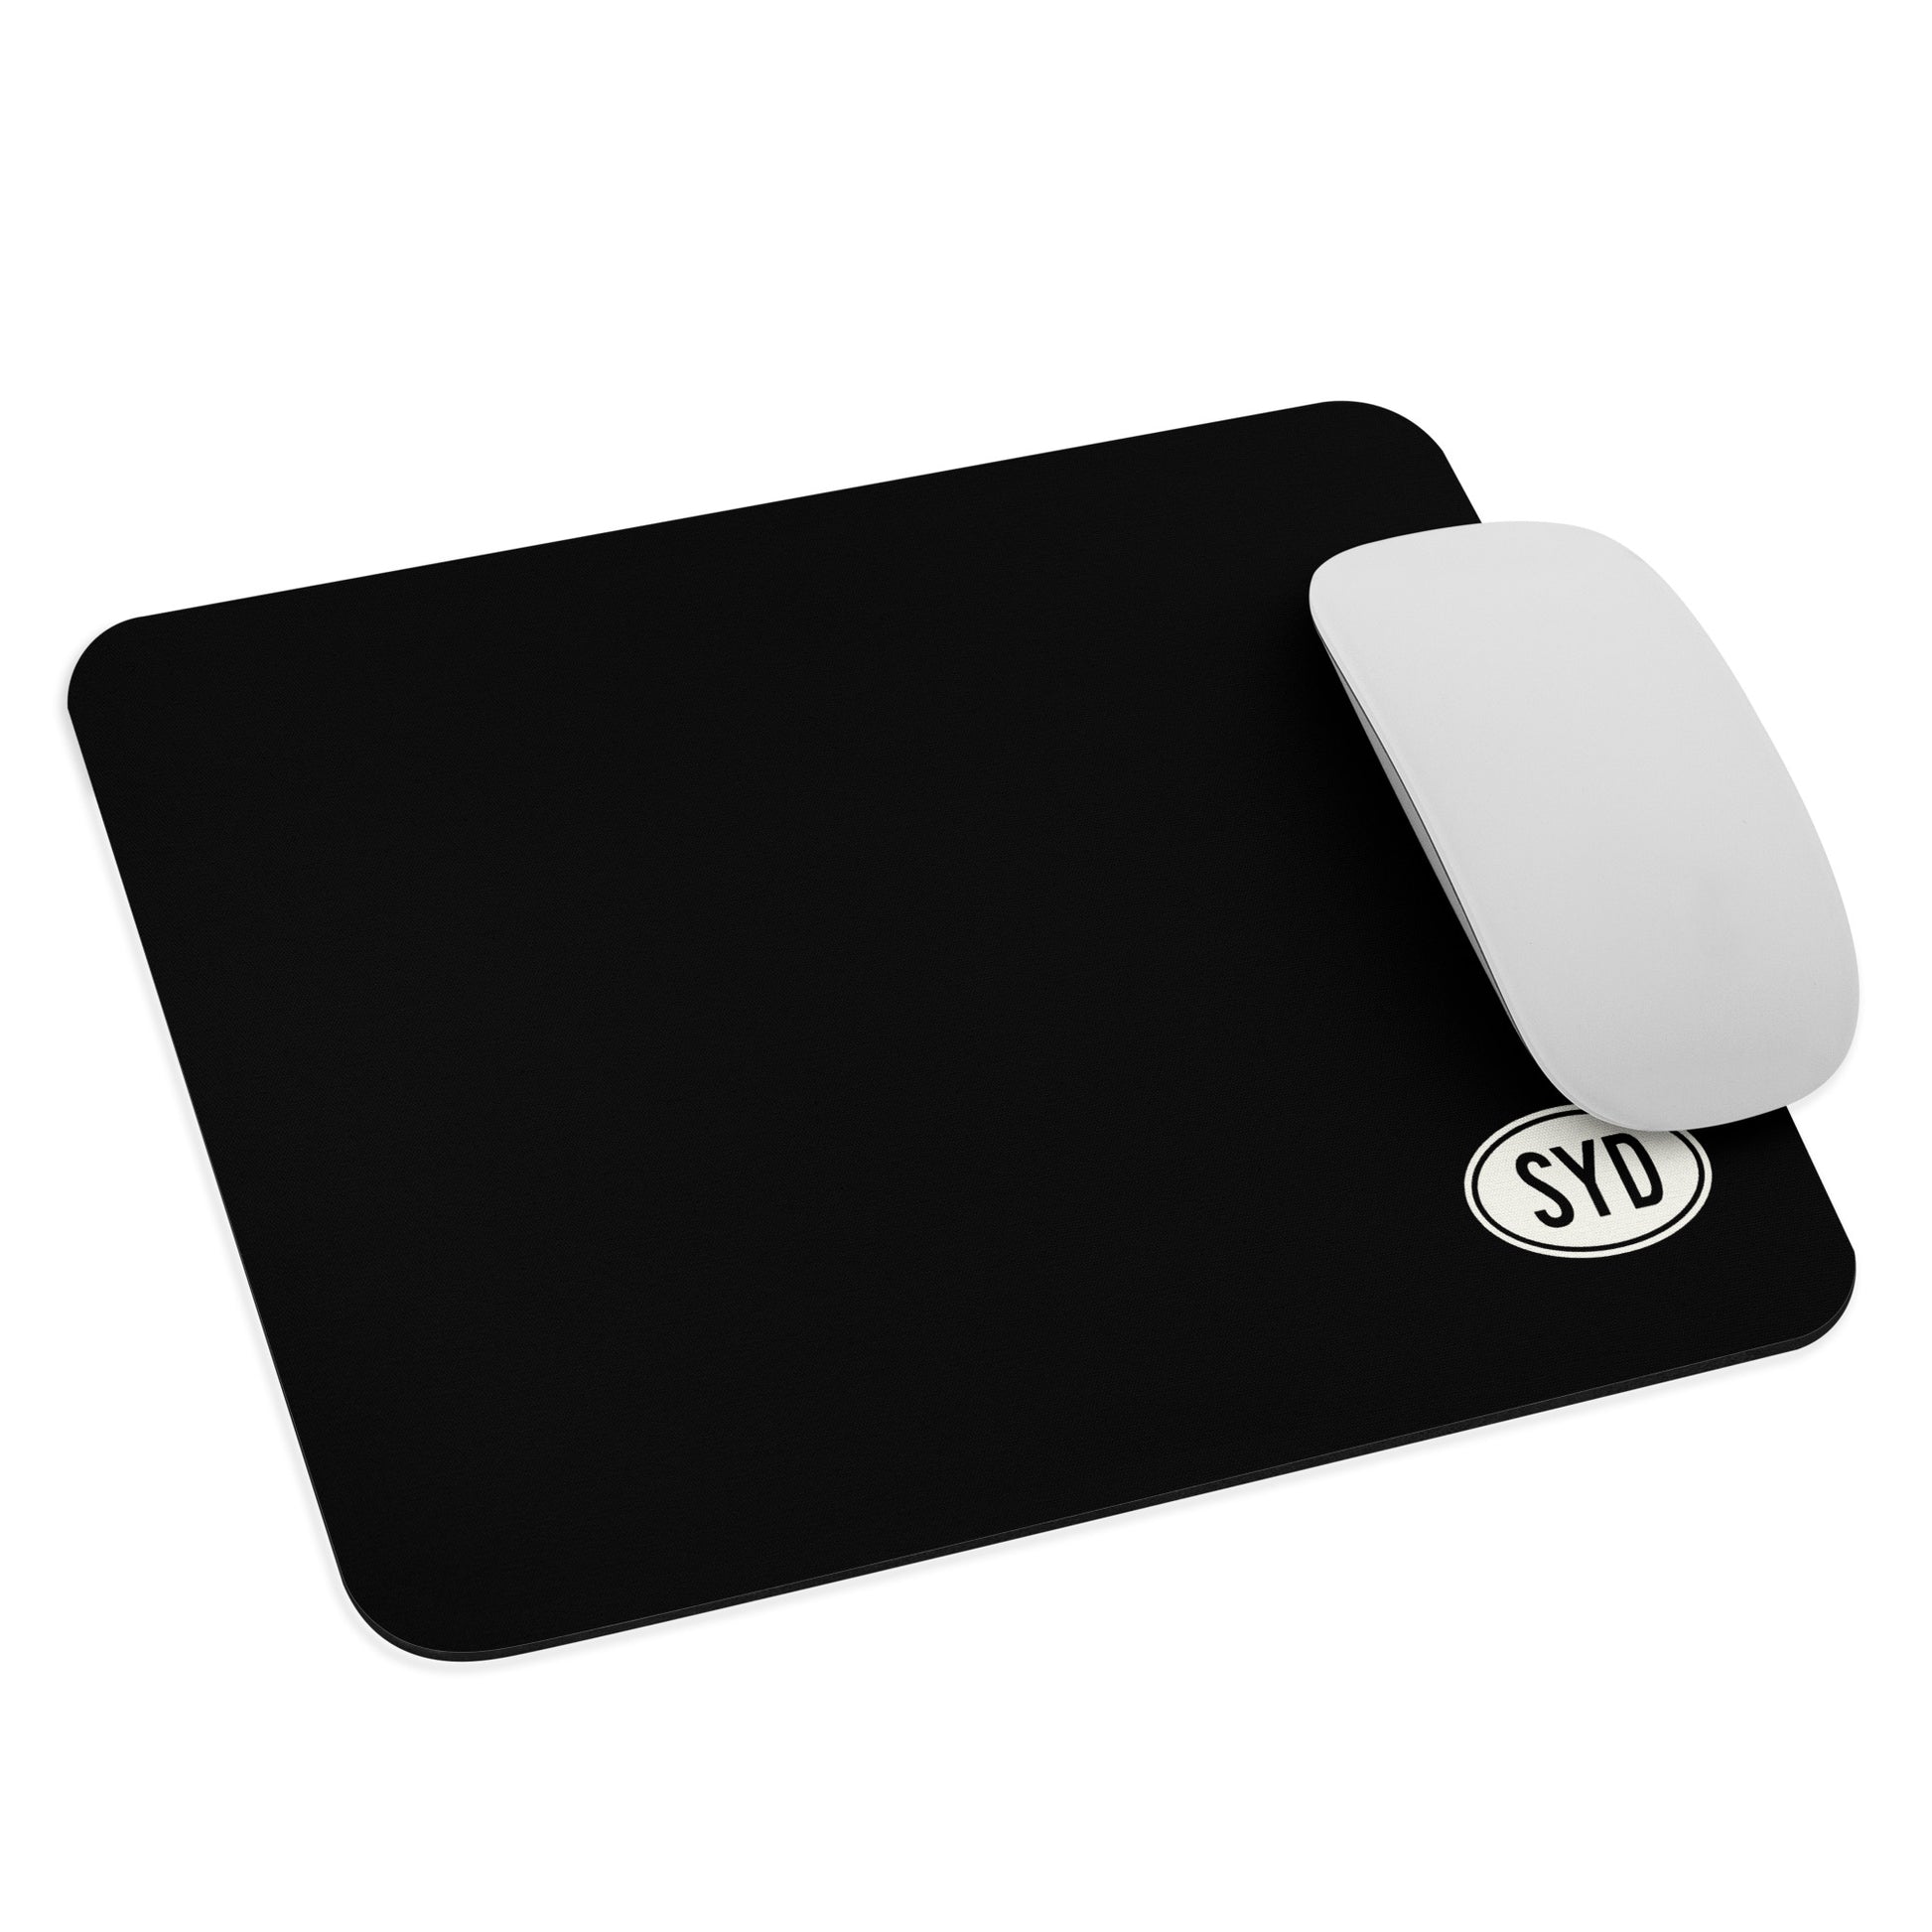 Unique Travel Gift Mouse Pad - White Oval • SYD Sydney • YHM Designs - Image 03